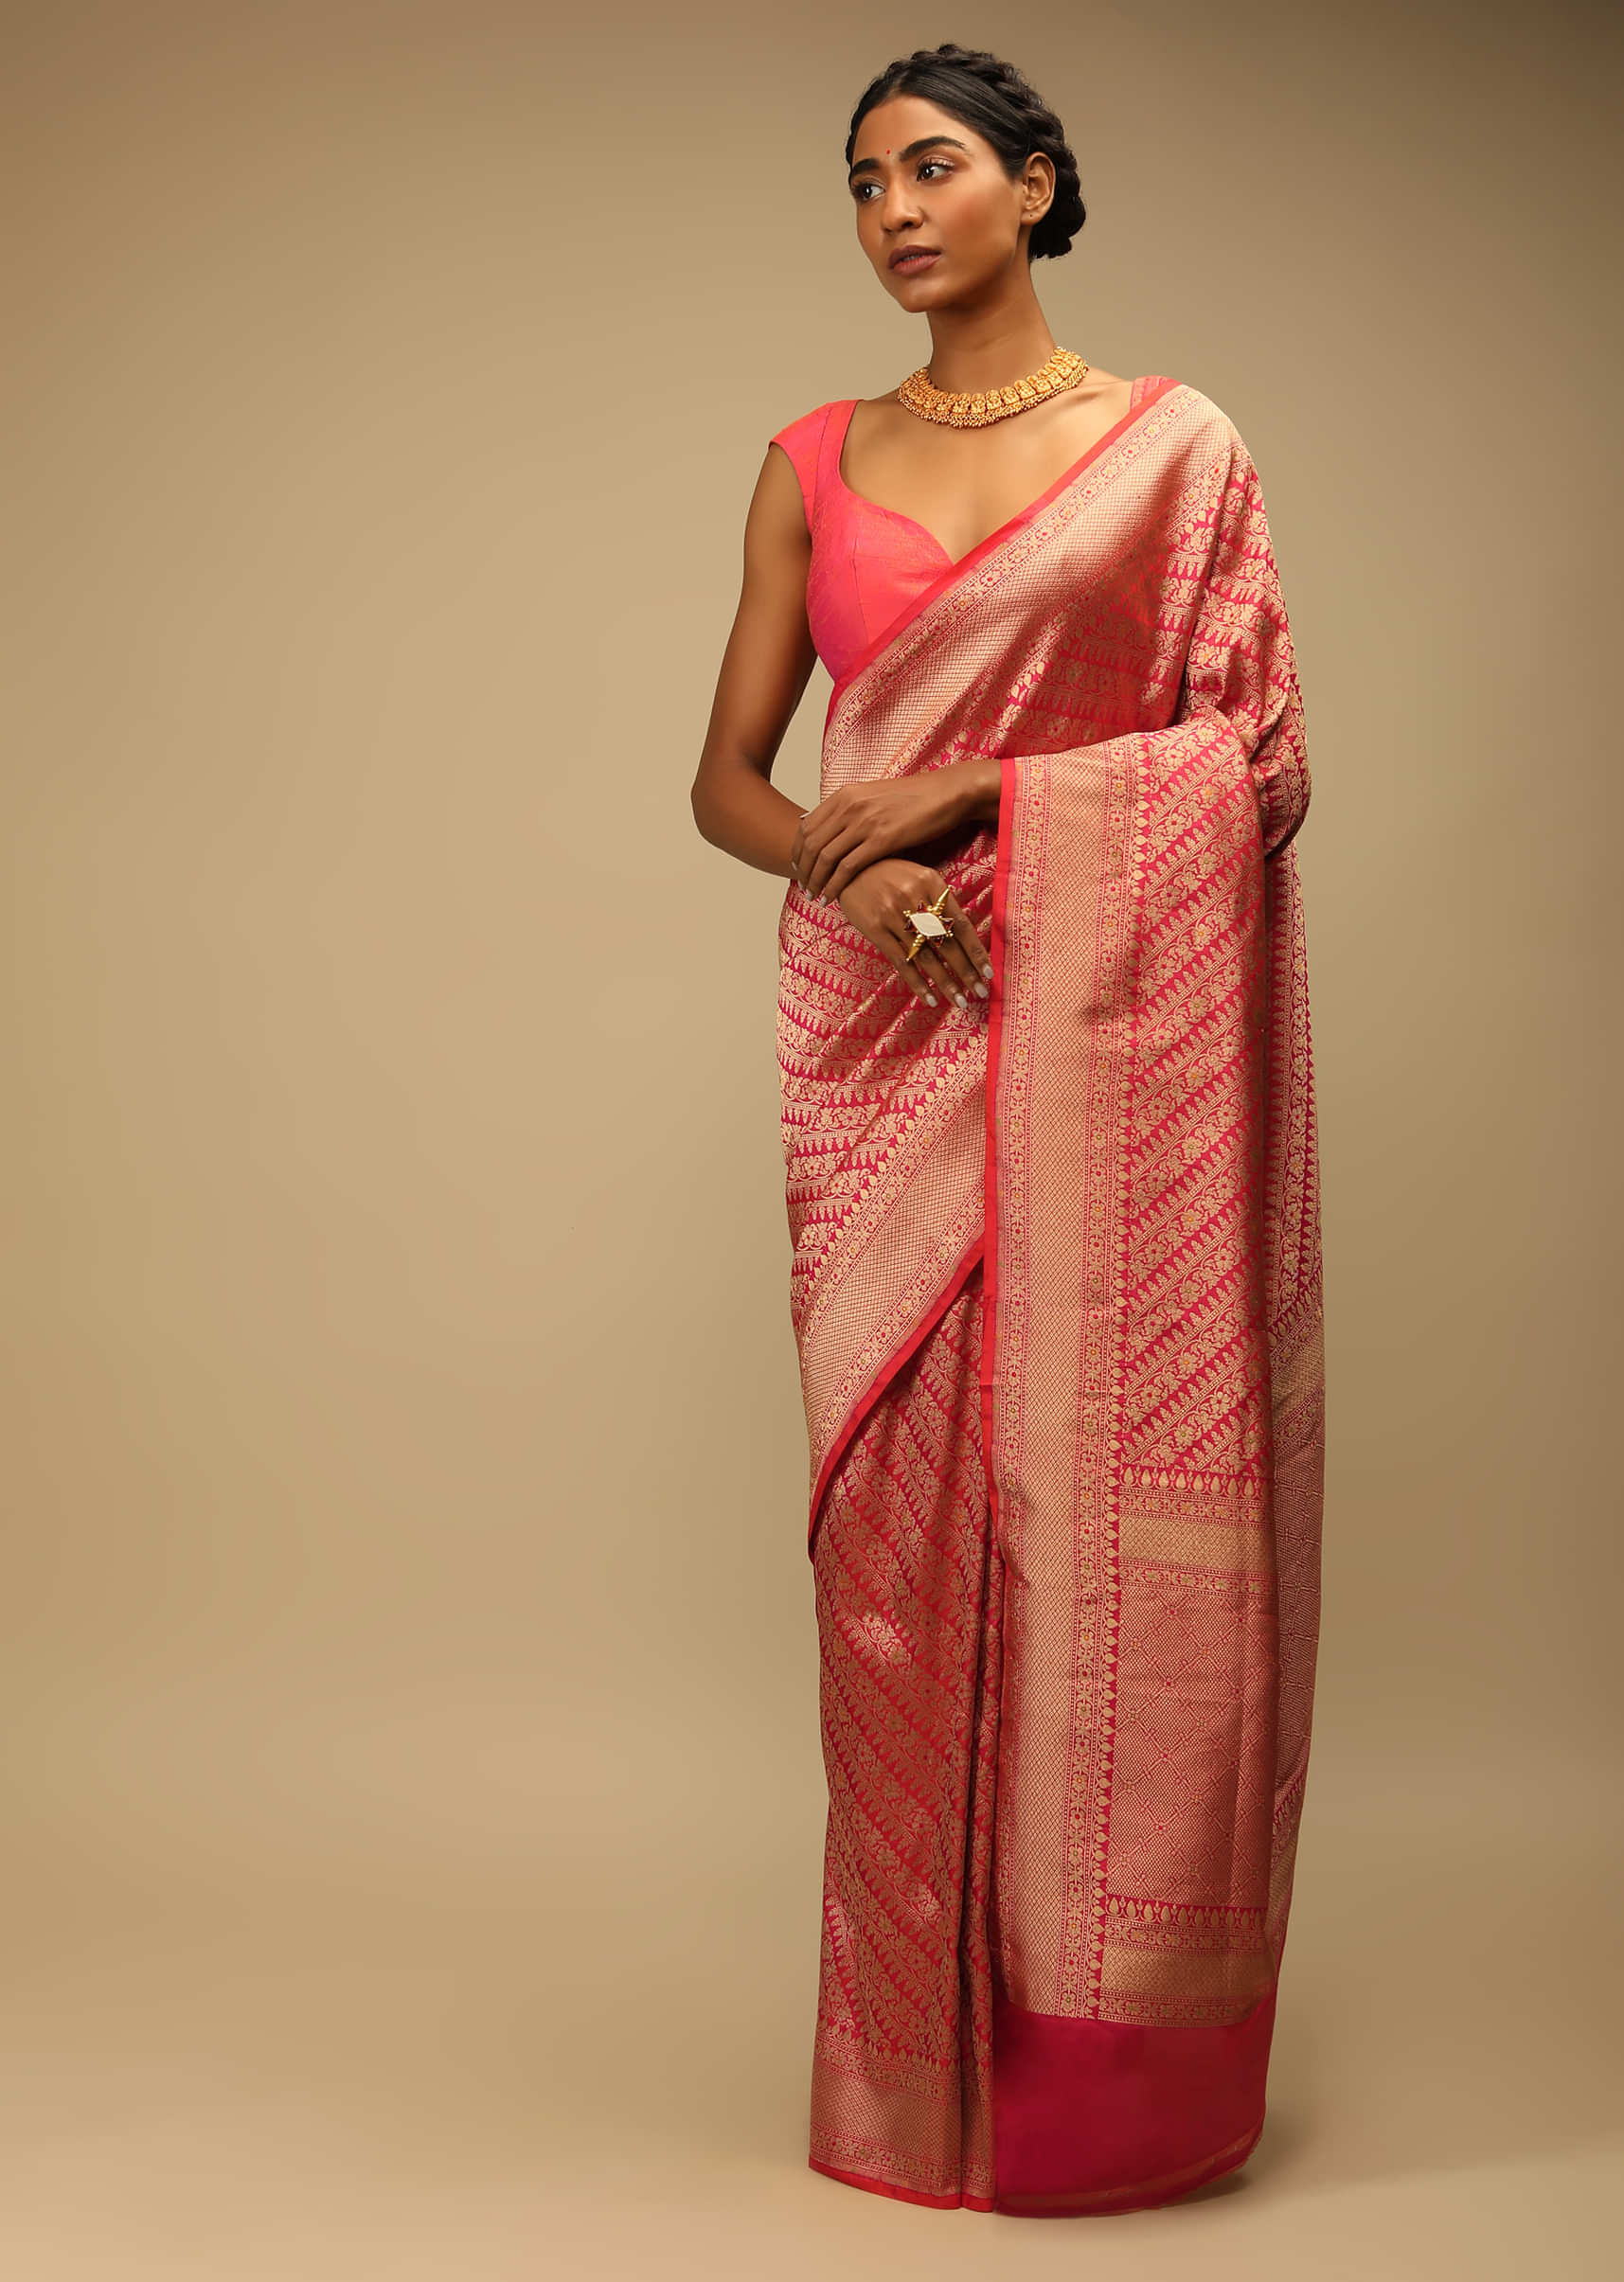 Coral Two Toned Saree In Pure Handloom Silk With Woven Floral Design In Diagonal Pattern 